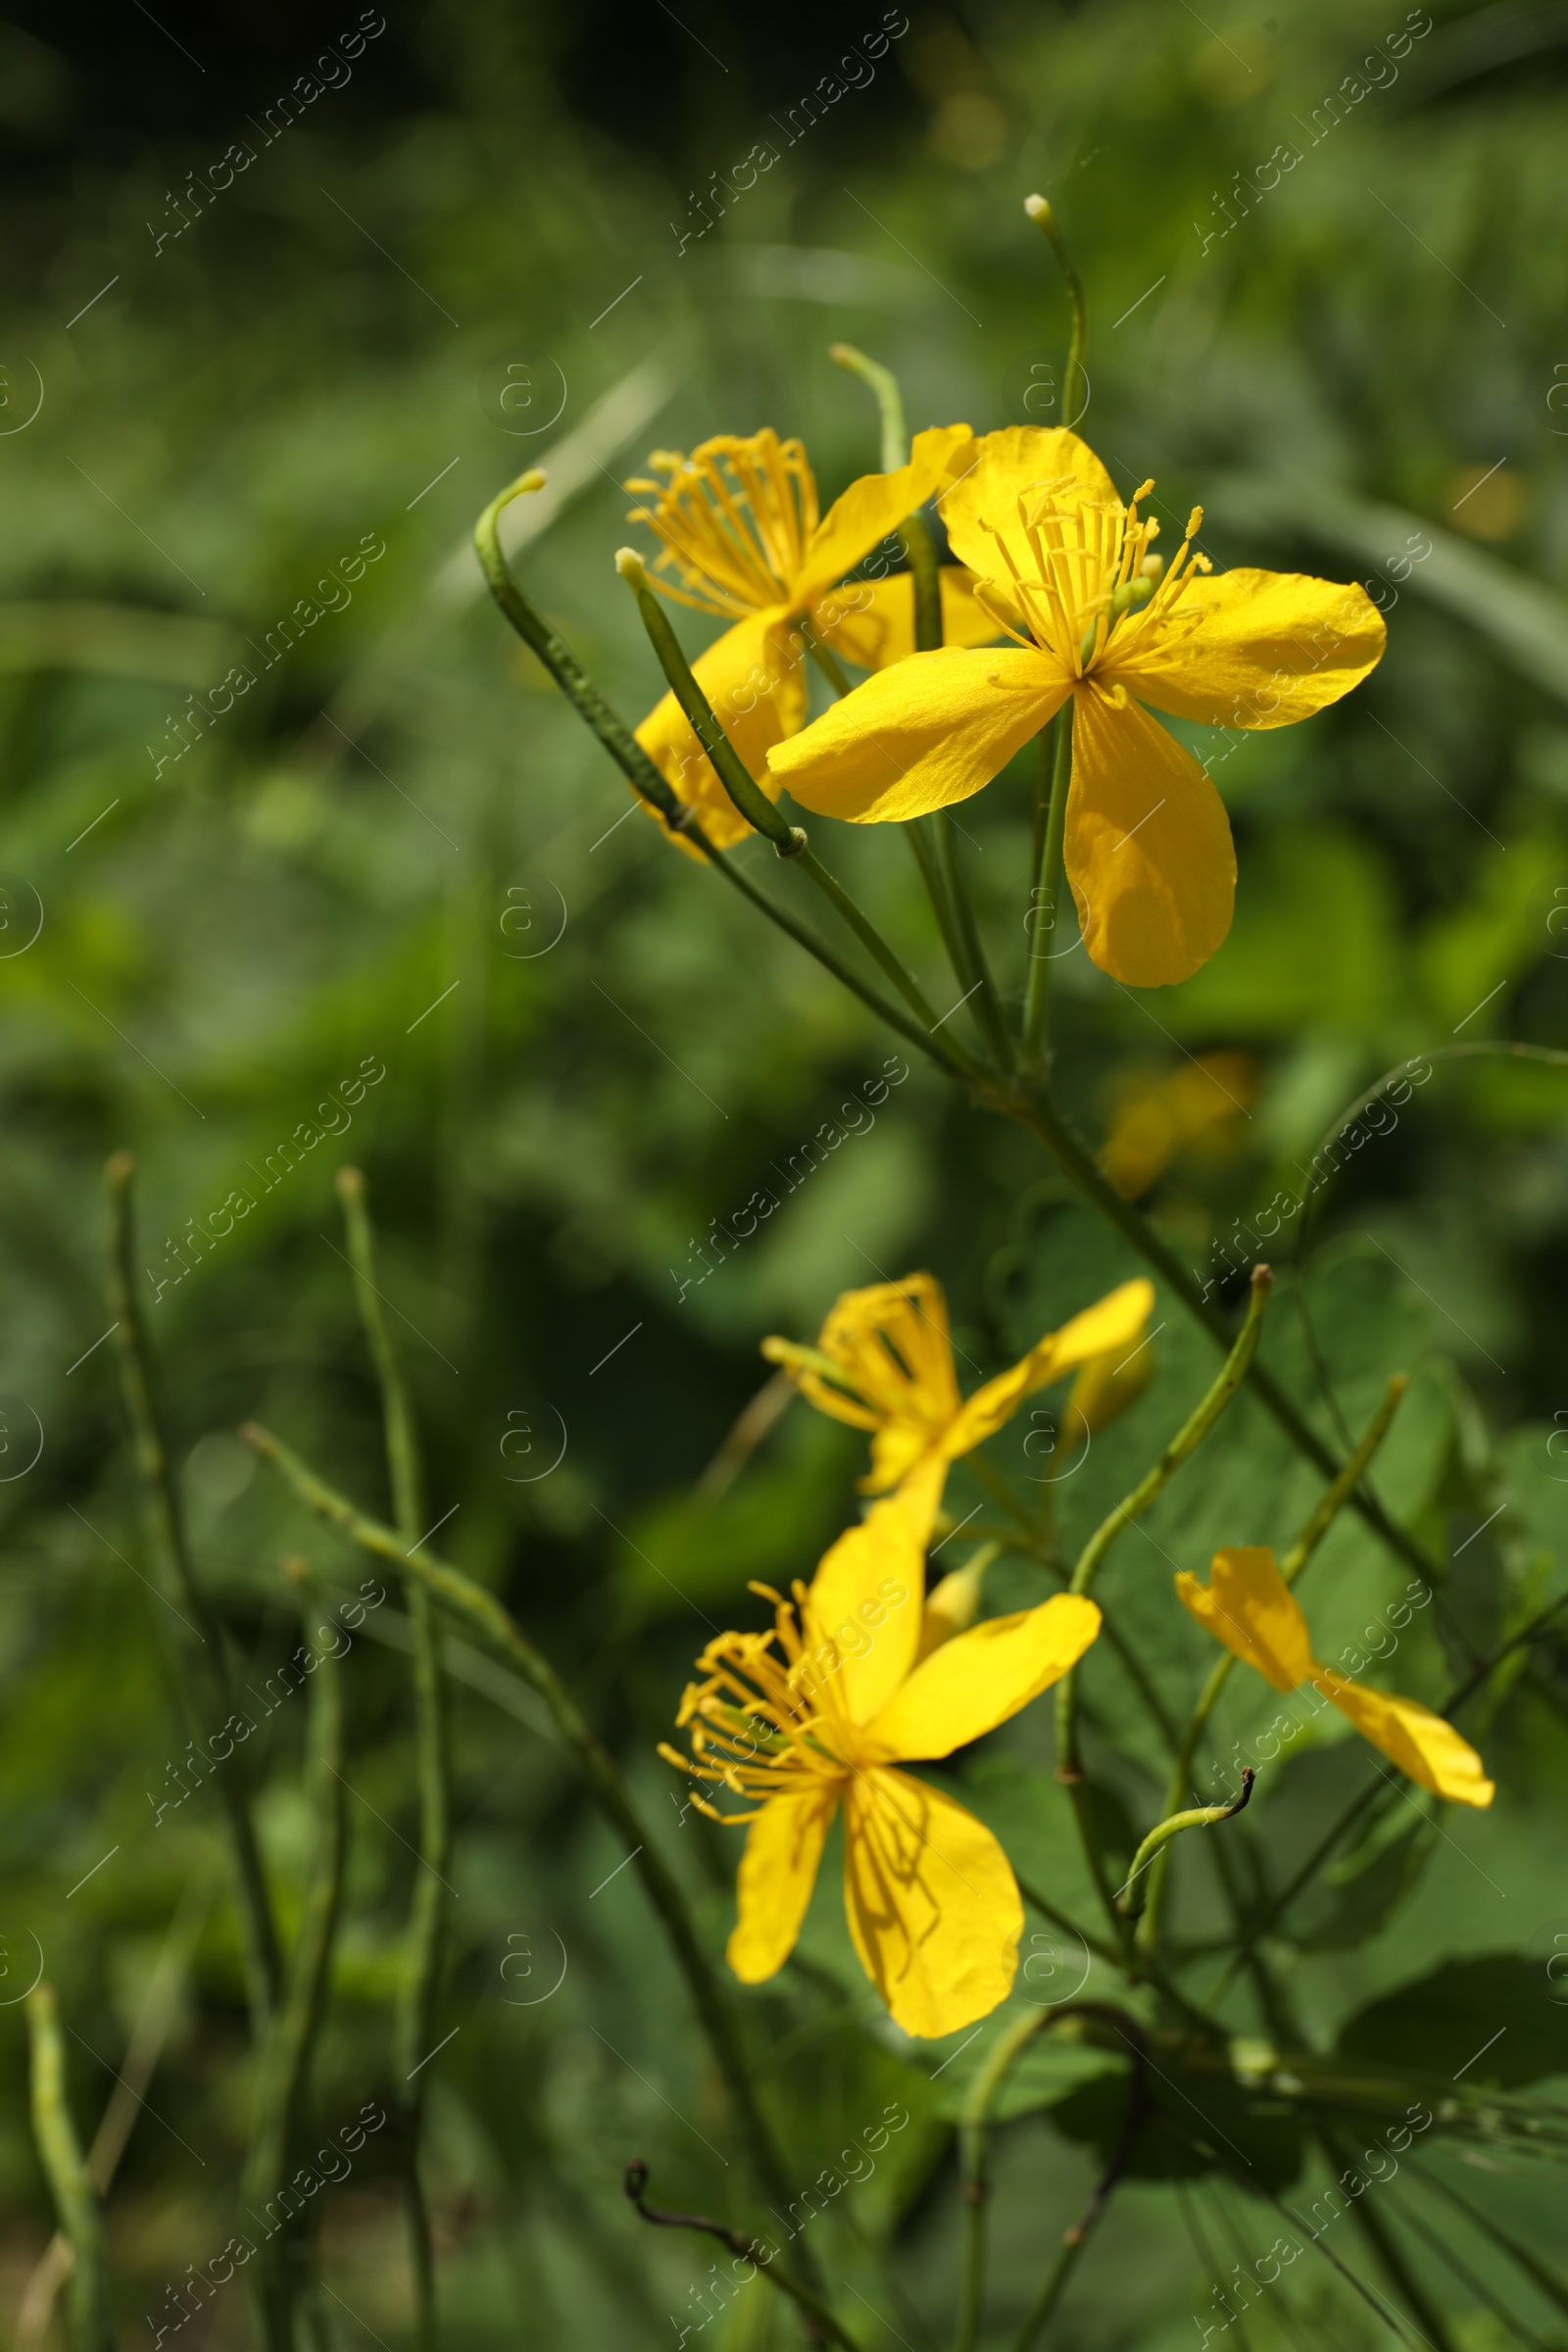 Photo of Celandine plant with yellow flowers and green leaves growing outdoors